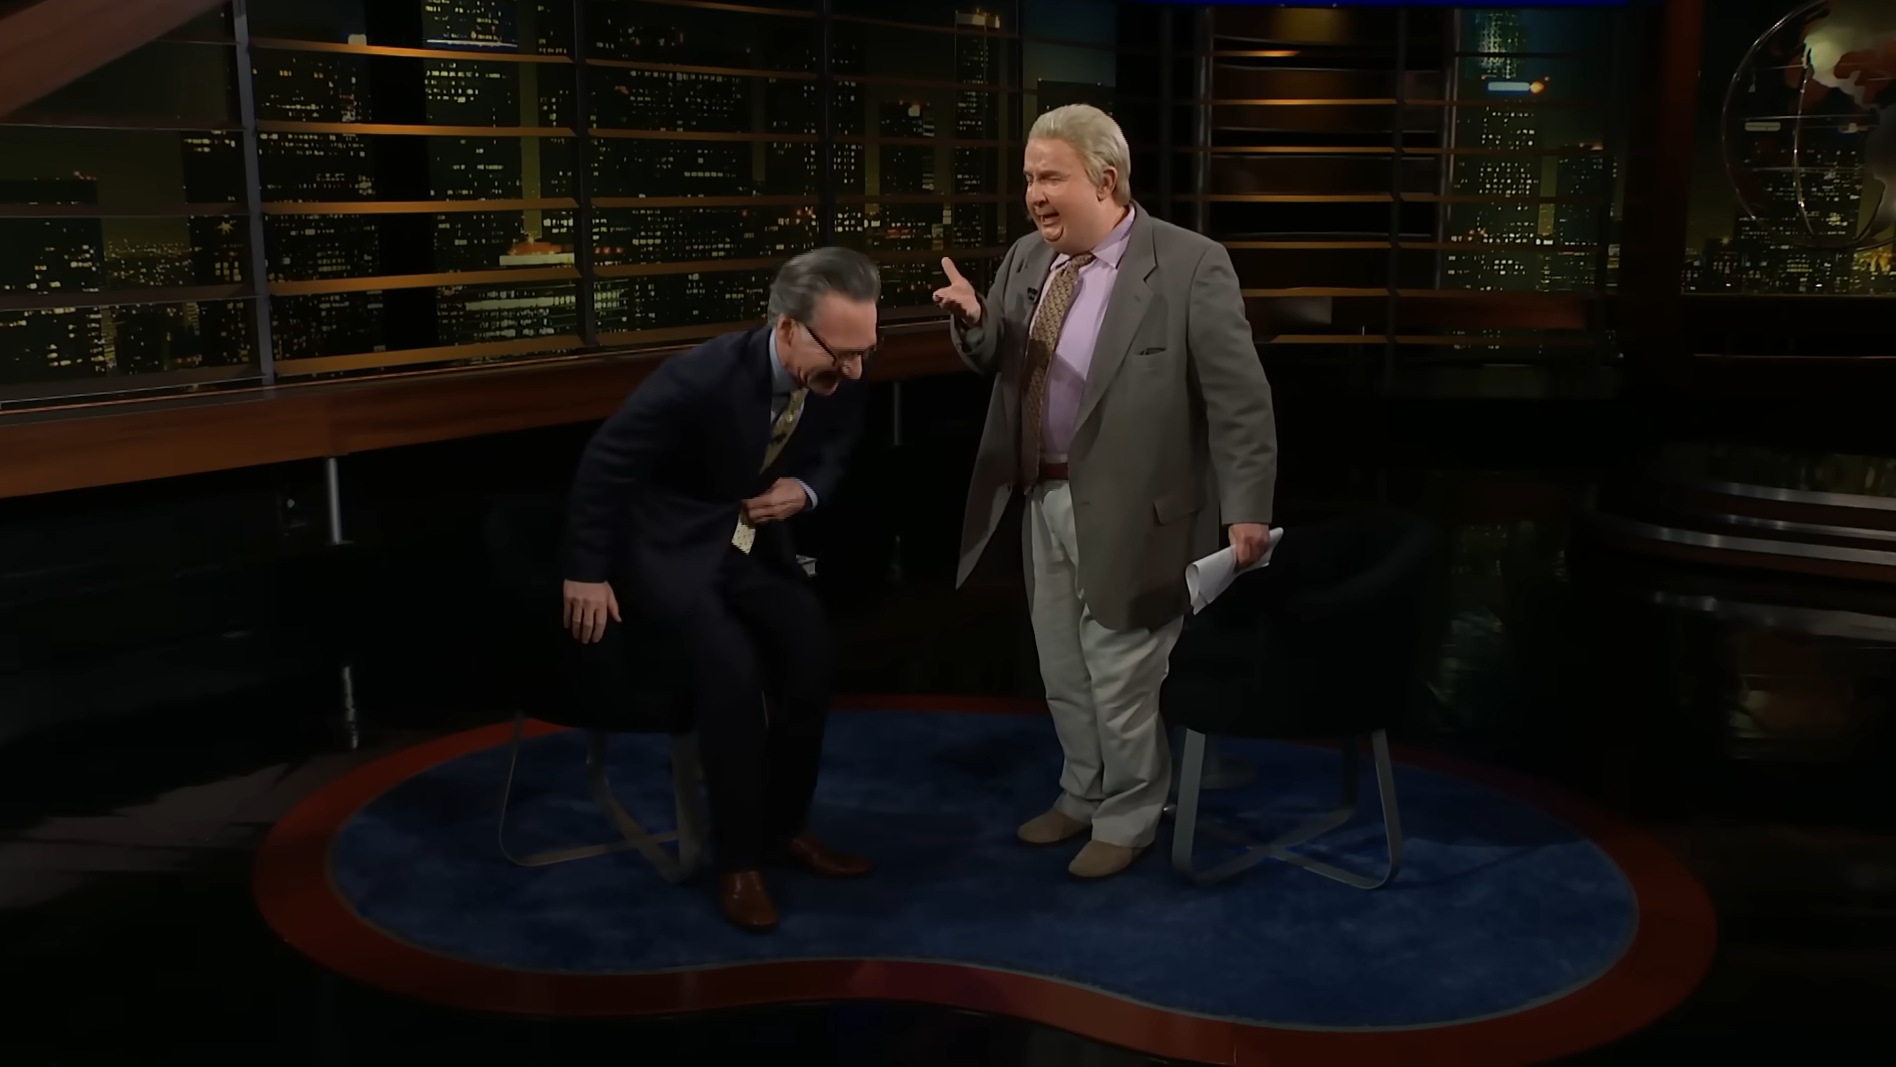 Jiminy Glick forces Bill Maher to give first enjoyable interview in years